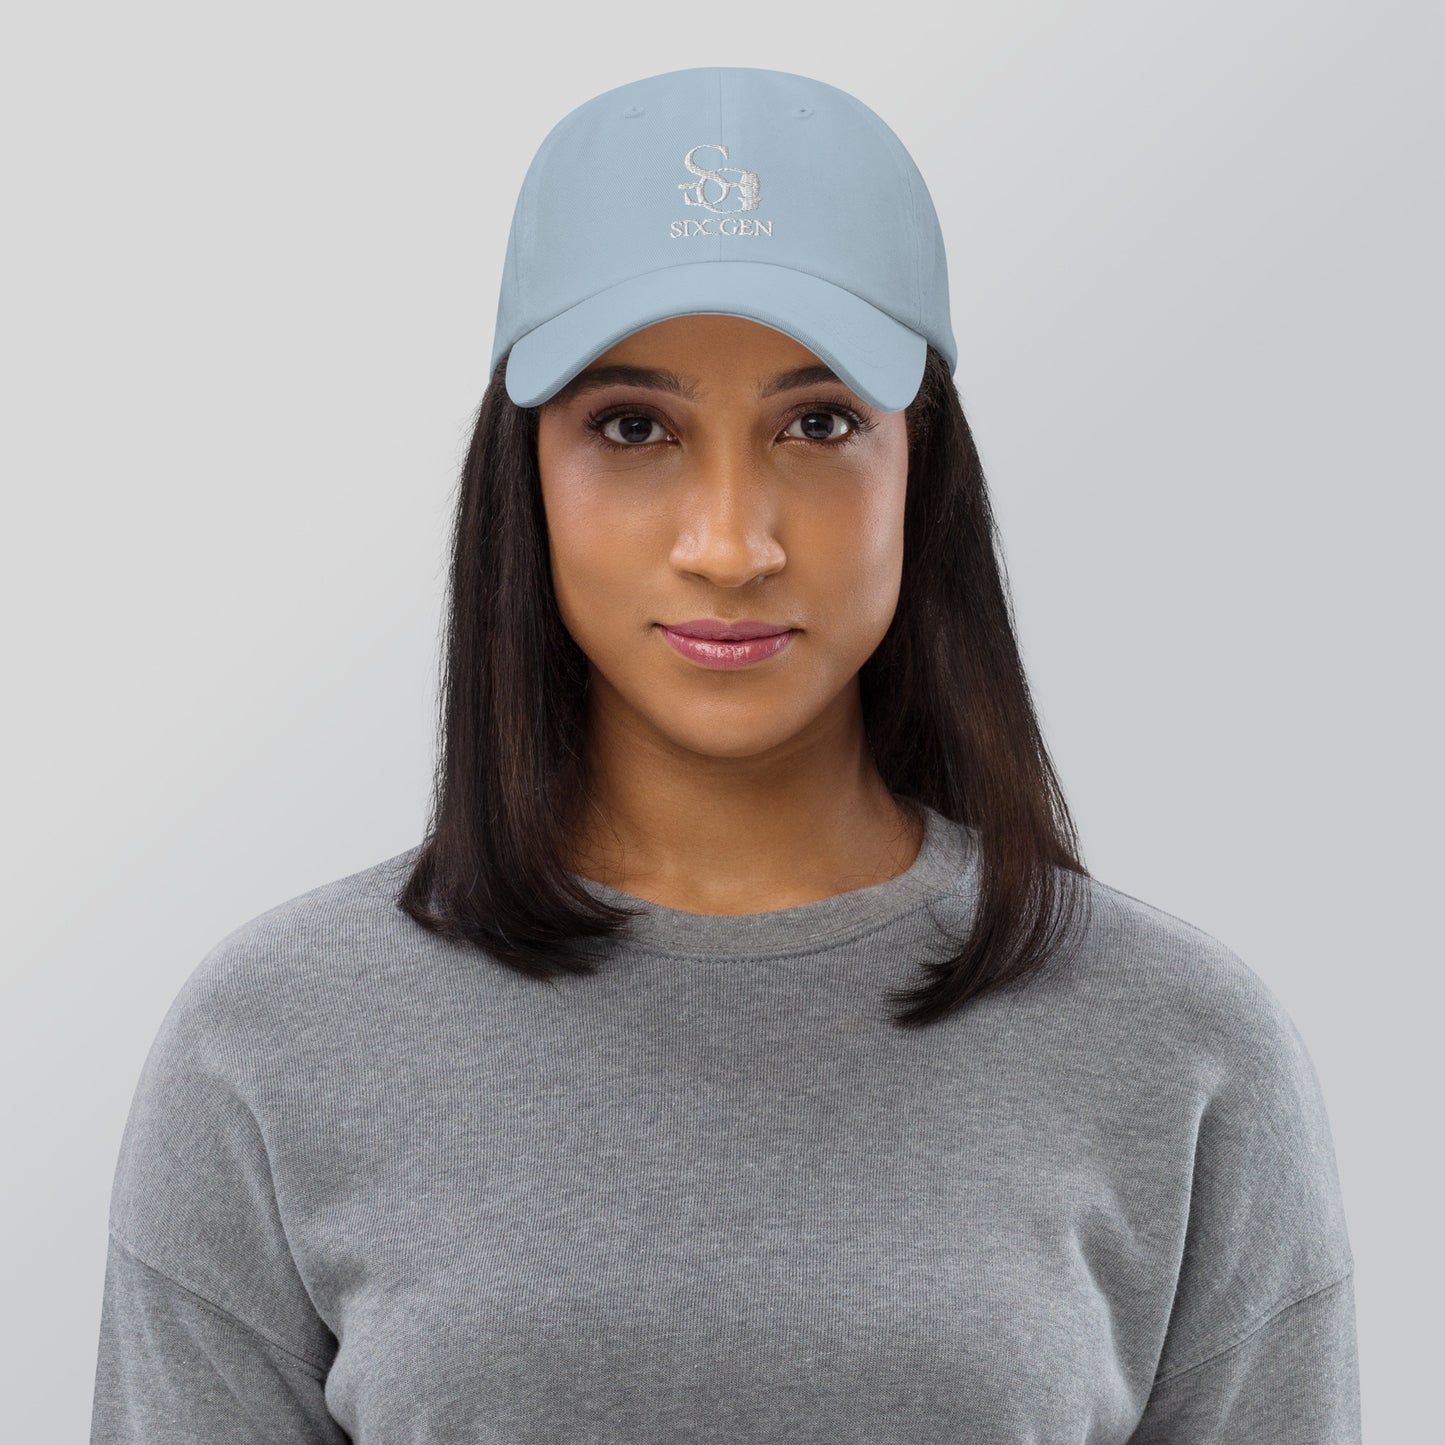 Baby blue hat with six gen white logo